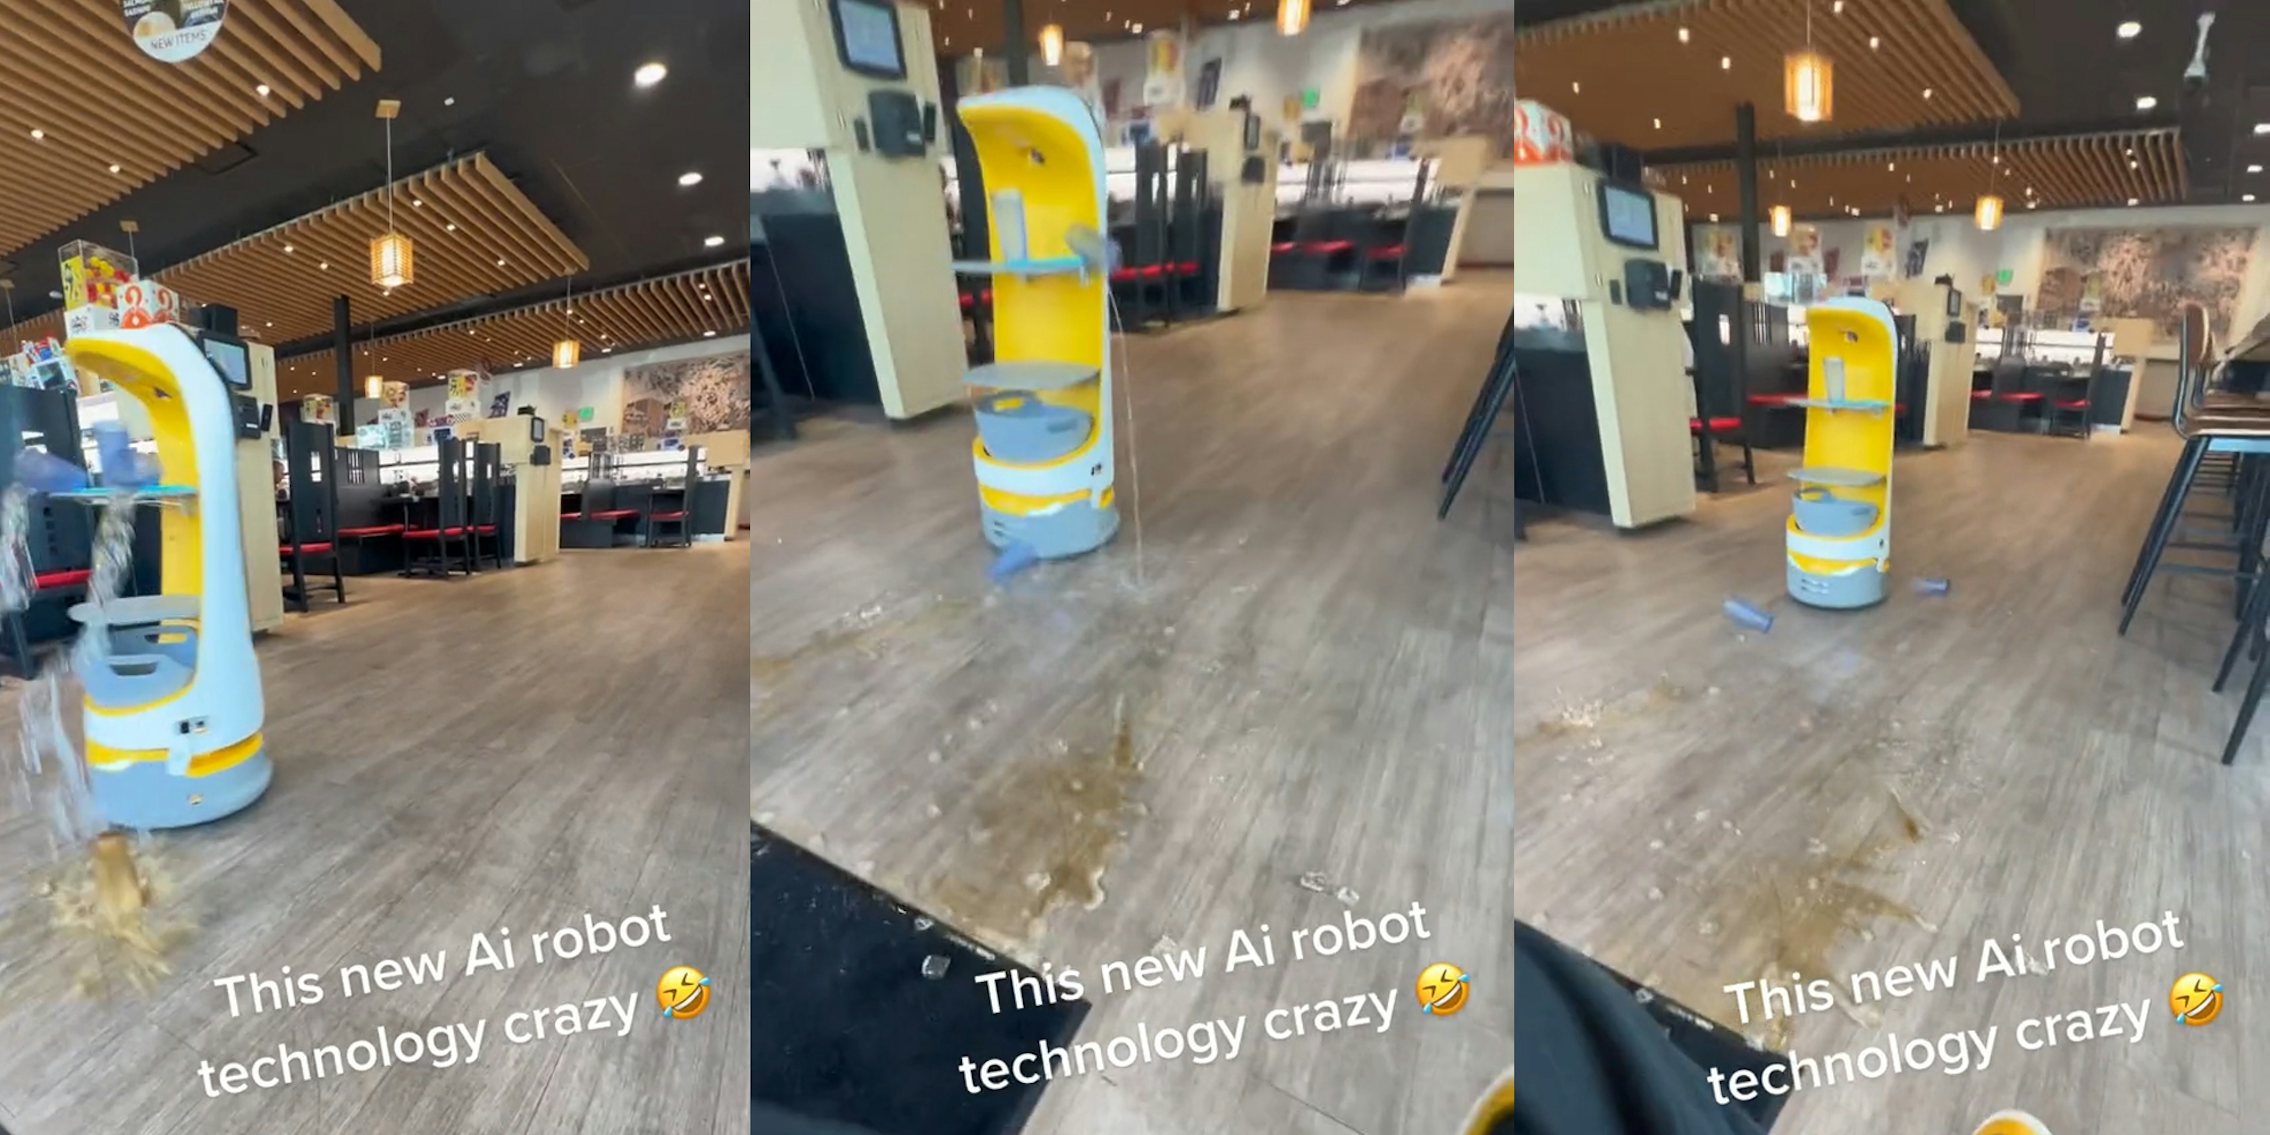 robot server spilling drinks all over floor with caption 'This new Ai robot technology crazy' (l) robot server spilling drinks all over floor with caption 'This new Ai robot technology crazy' (c) robot server spilling drinks all over floor with caption 'This new Ai robot technology crazy' (r)